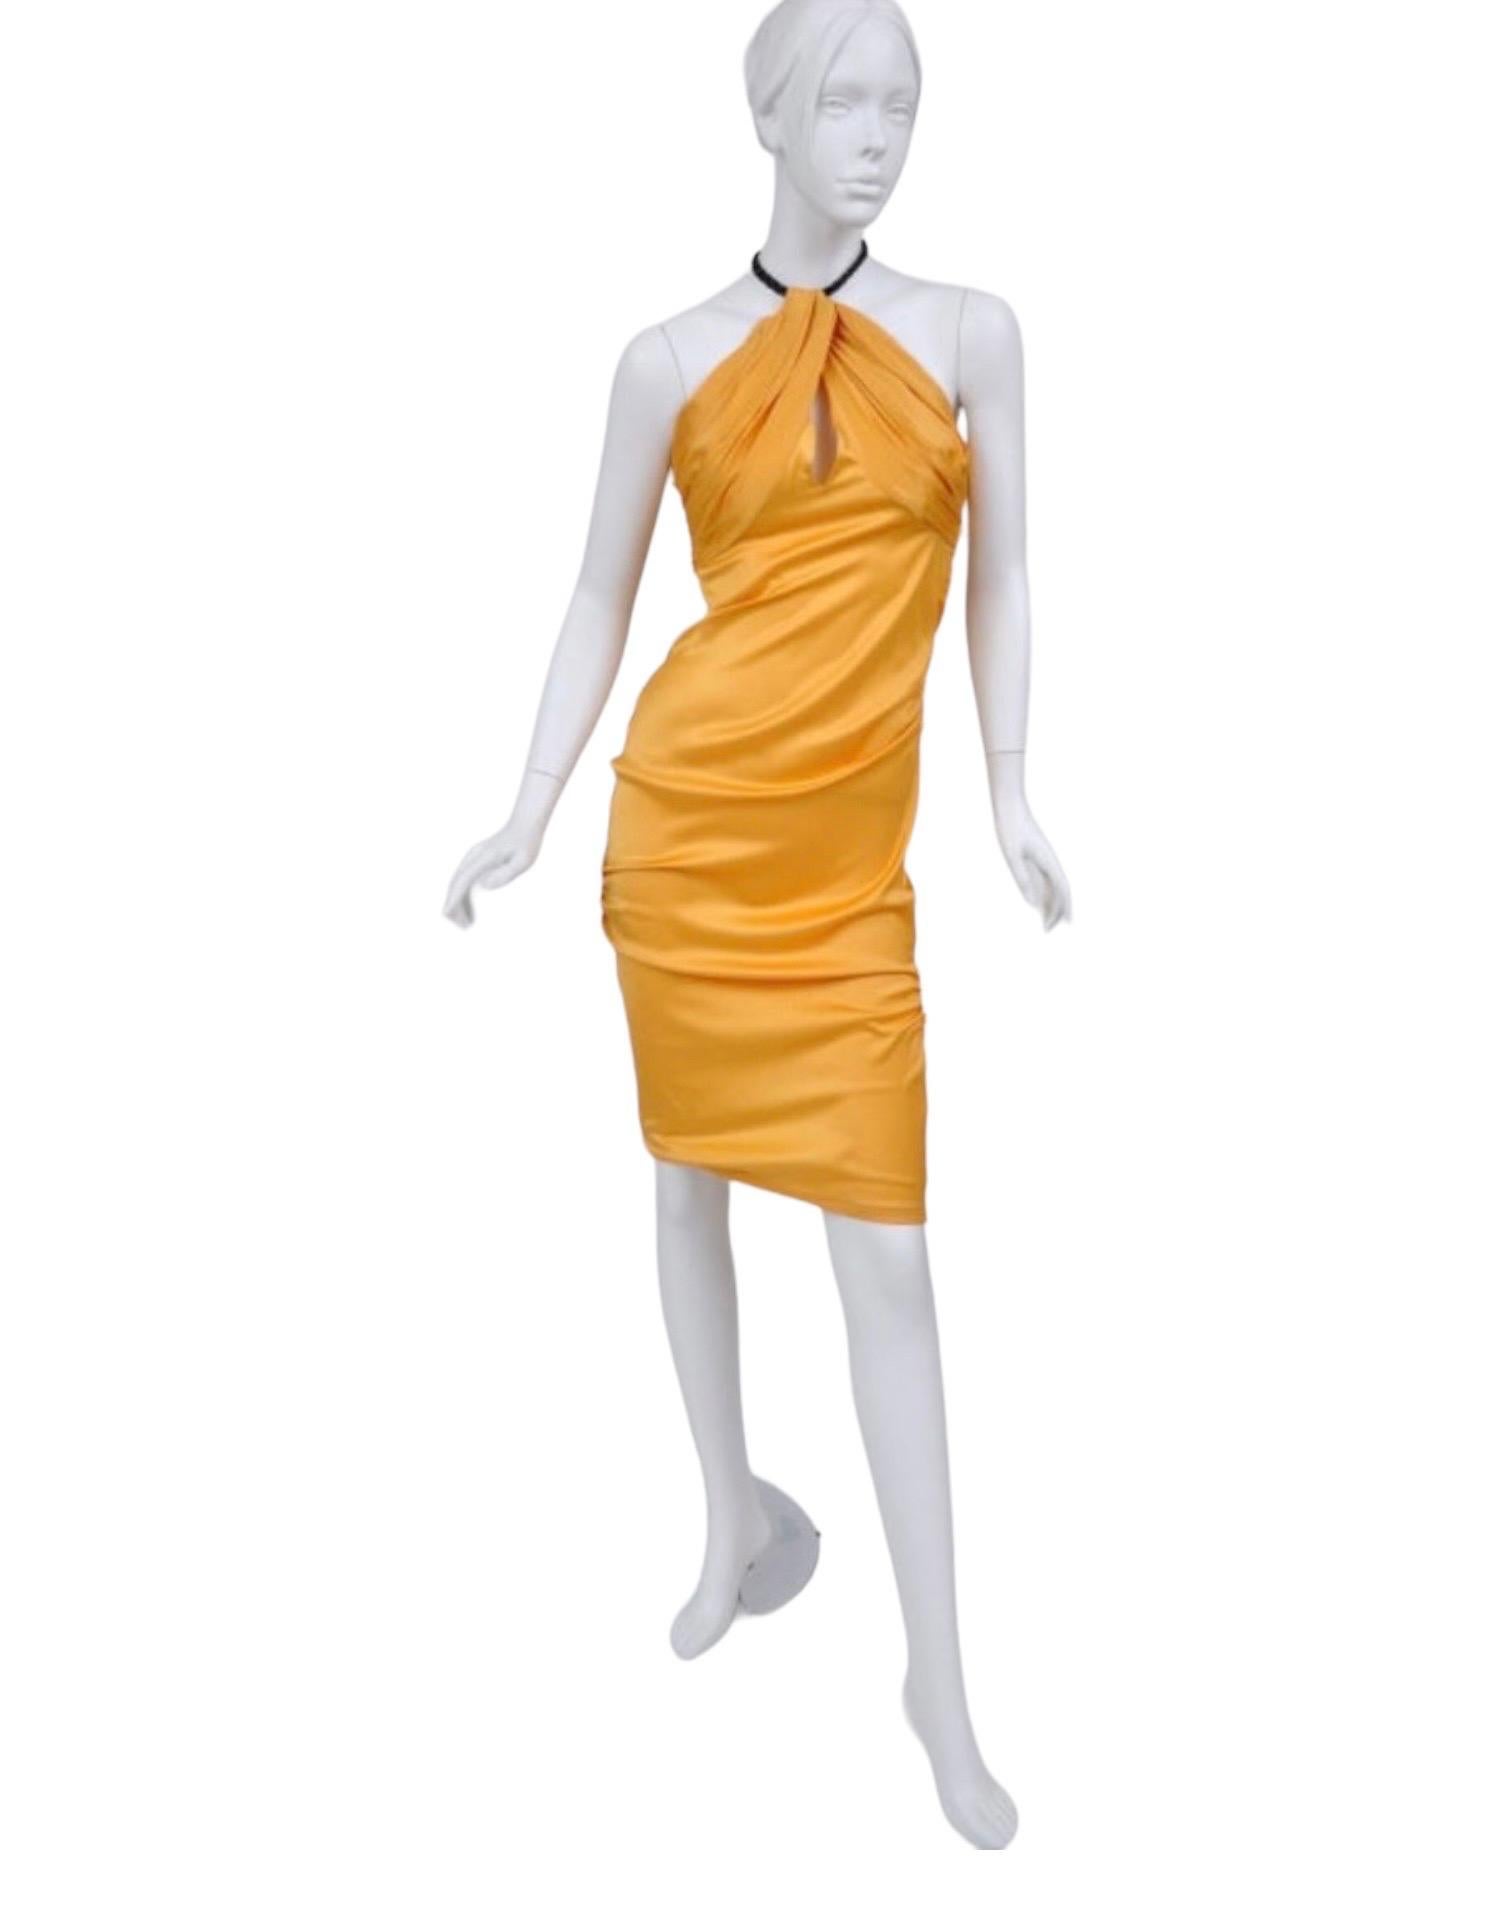 TOM FORD for GUCCI DRESS
2004 Cruise Collection
Size tag missing, approx. size 40
Tom has created a sensually tailored dress with signature touches of couture chic. Soft ruching gives a classic form a touch of feminine texture. Finished with braided